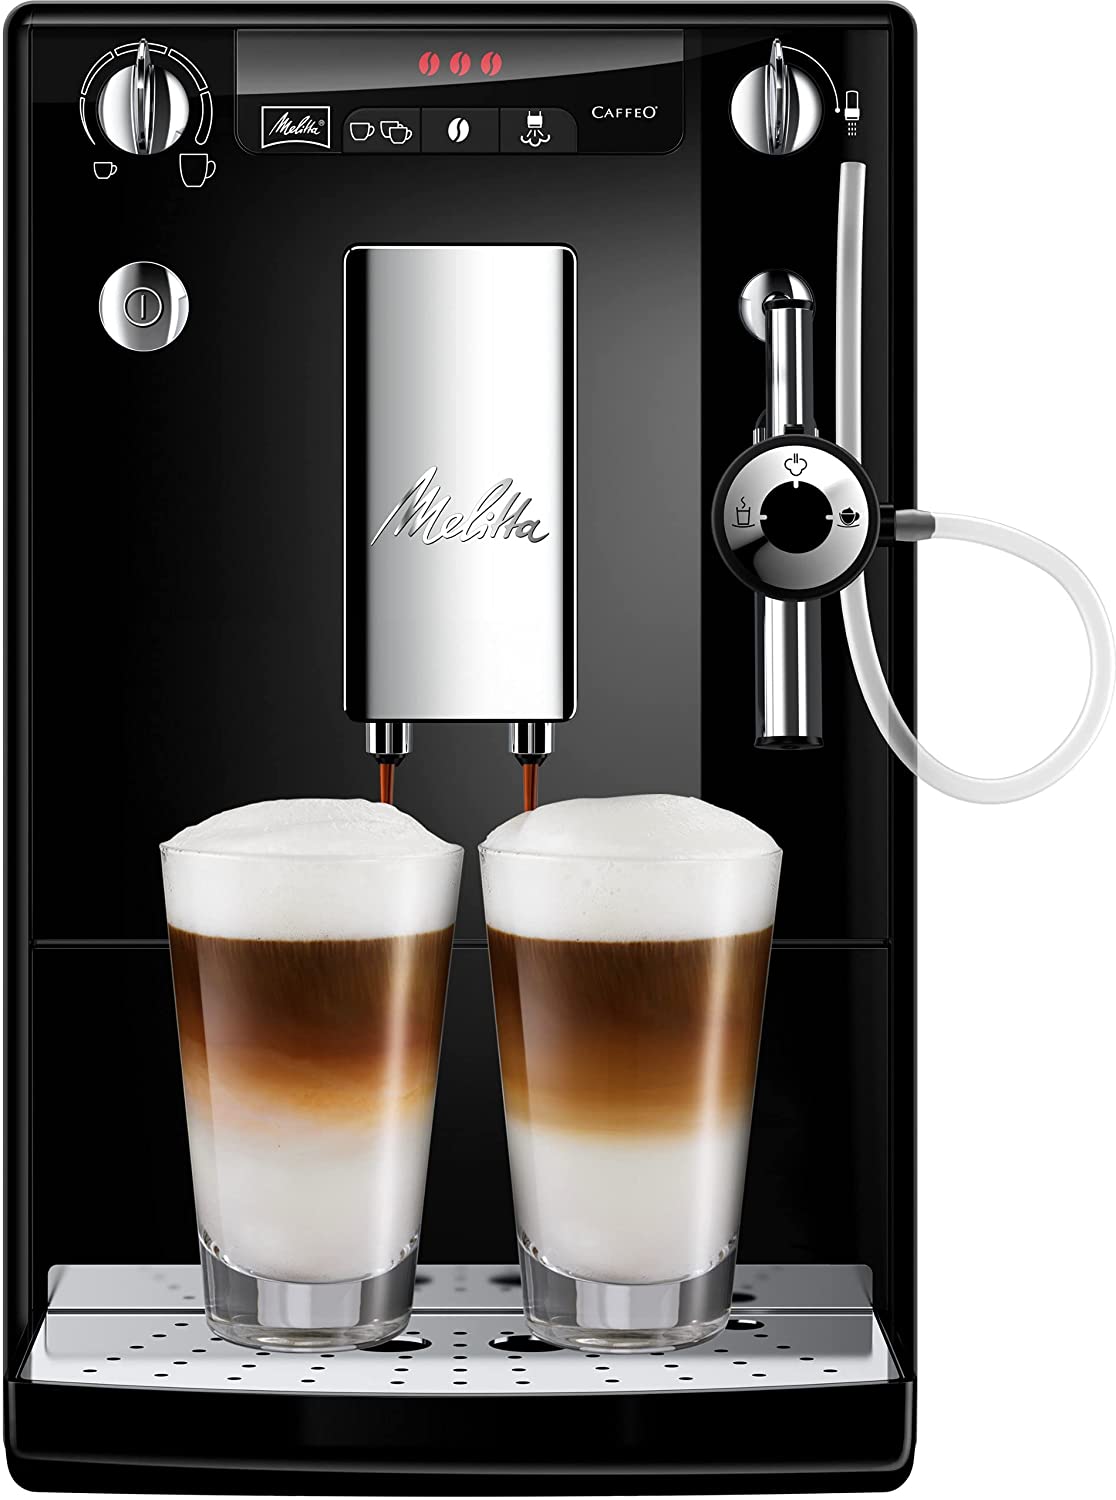 Melitta Caffeo Solo & Perfect Milk E957-101 Super Automatic Coffee Machine with Grinder, 15 Bar, Coffee Beans, Automatic Cleaning, Black (Refurbished)